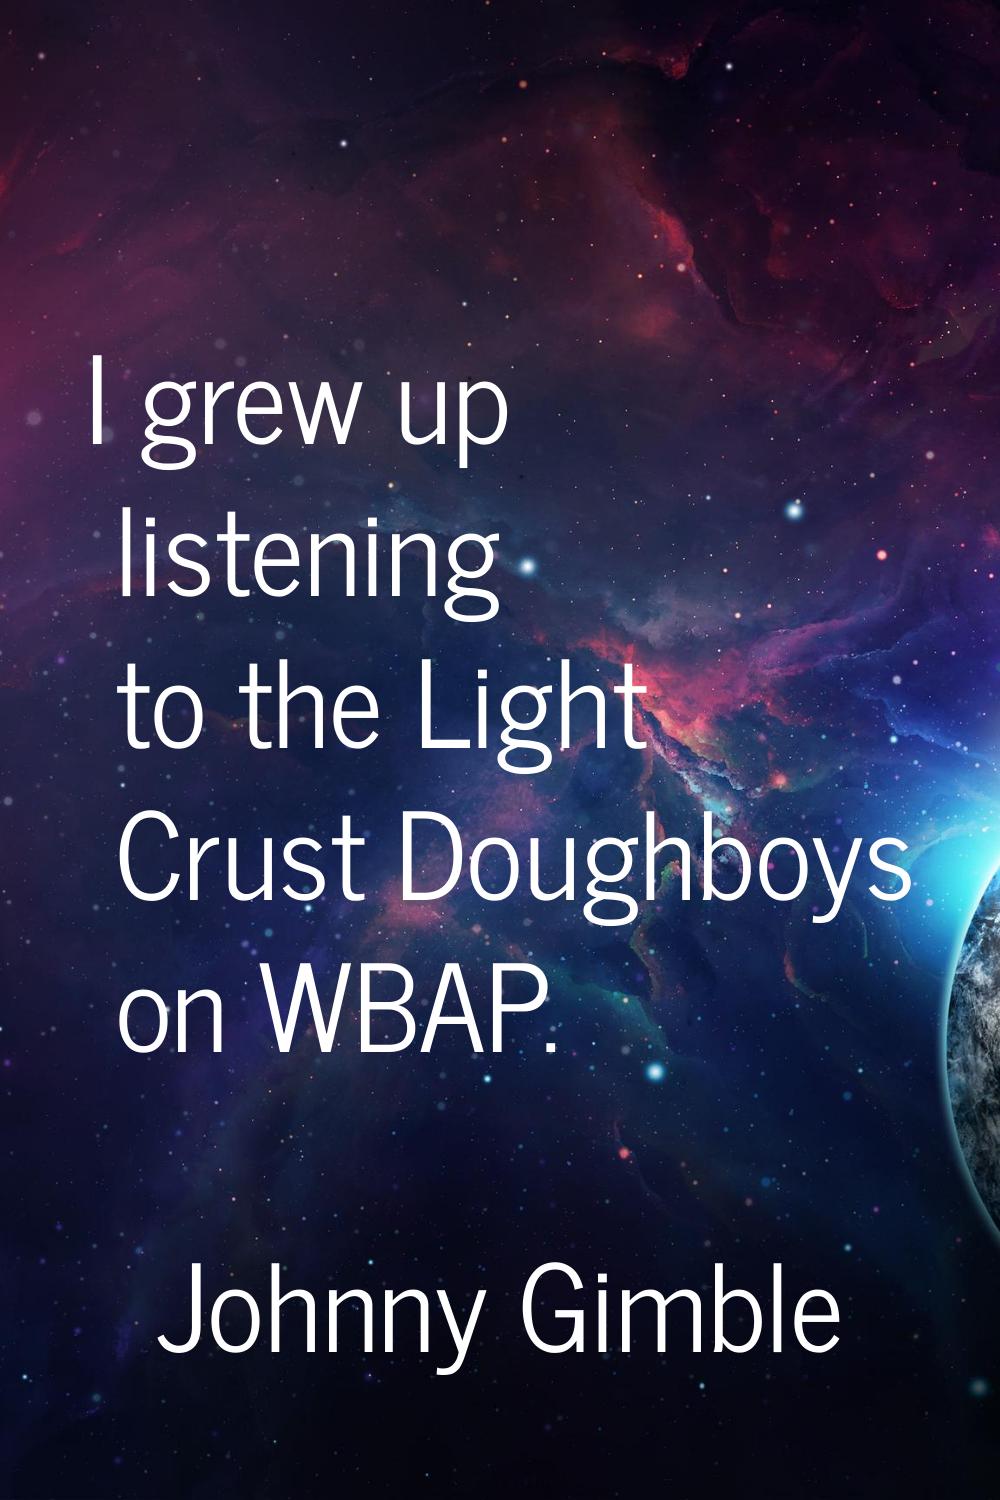 I grew up listening to the Light Crust Doughboys on WBAP.